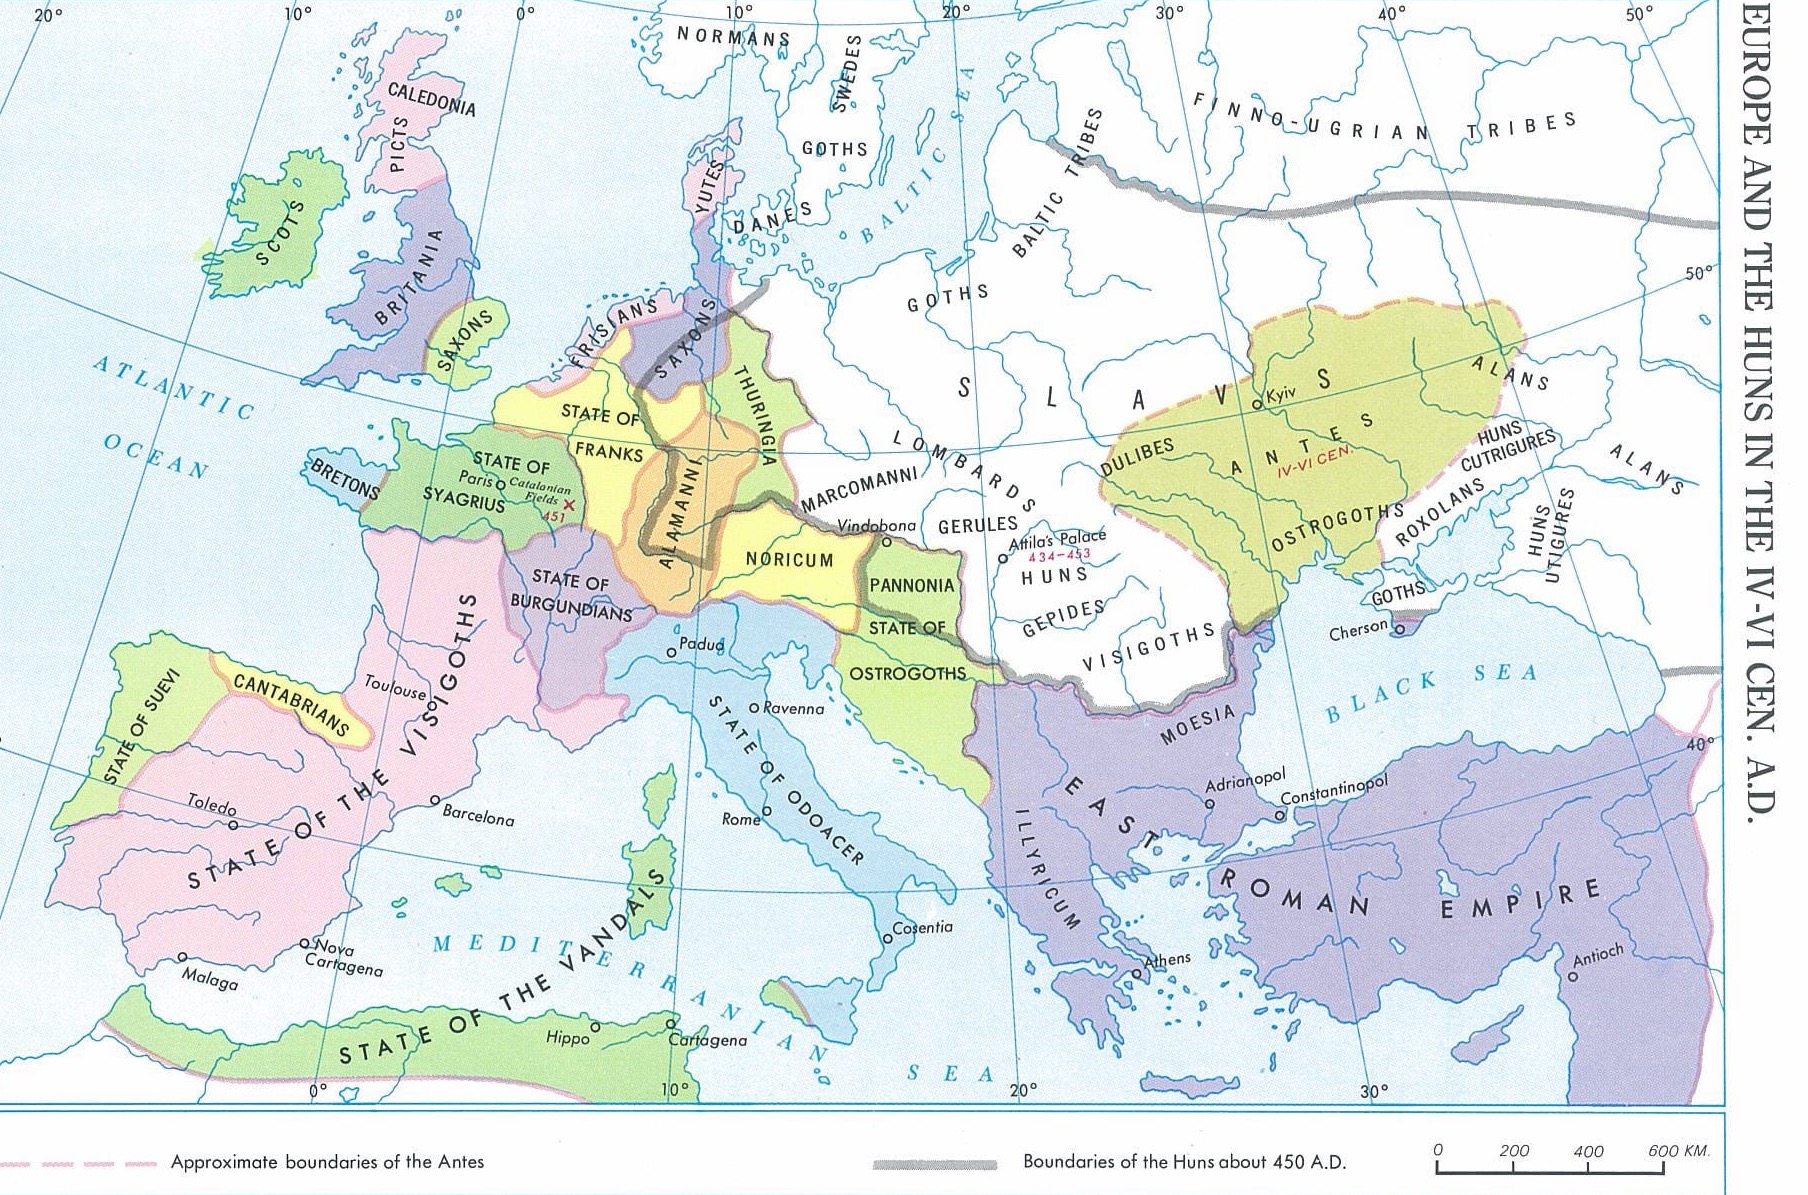 Europe and Huns in 4th - 6th cen. A.D.